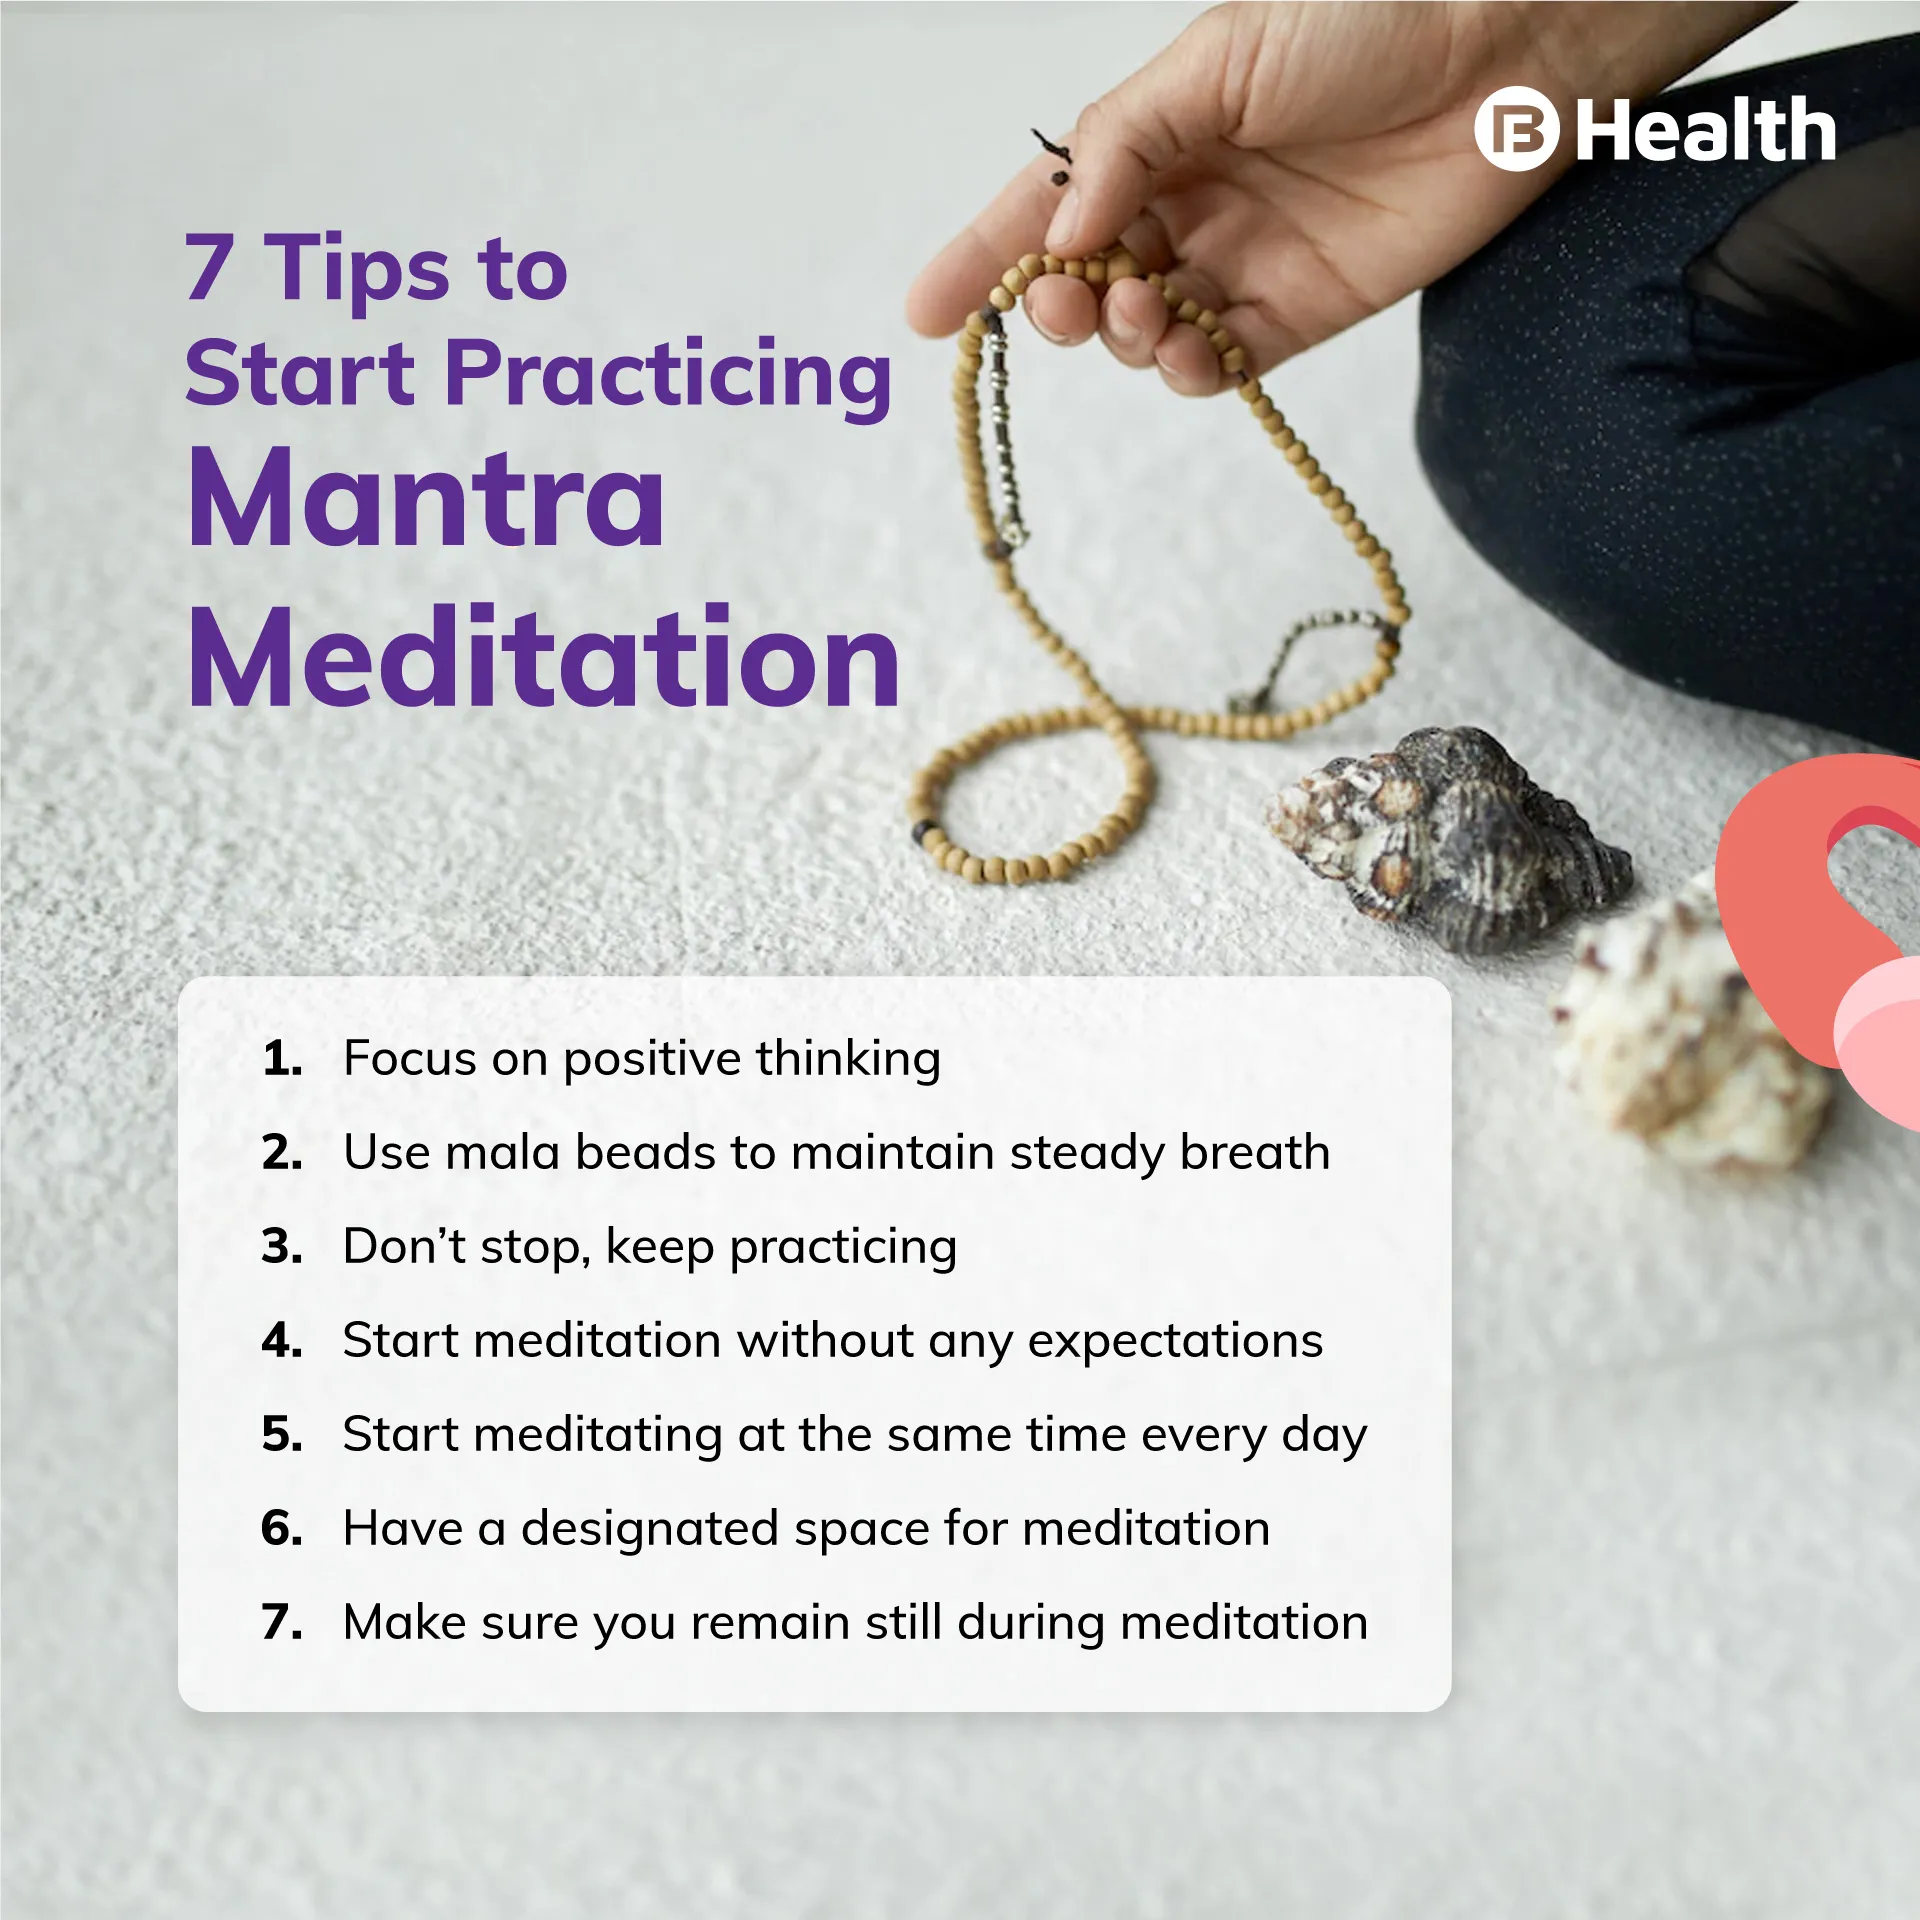 Tips to practice Mantra Meditation